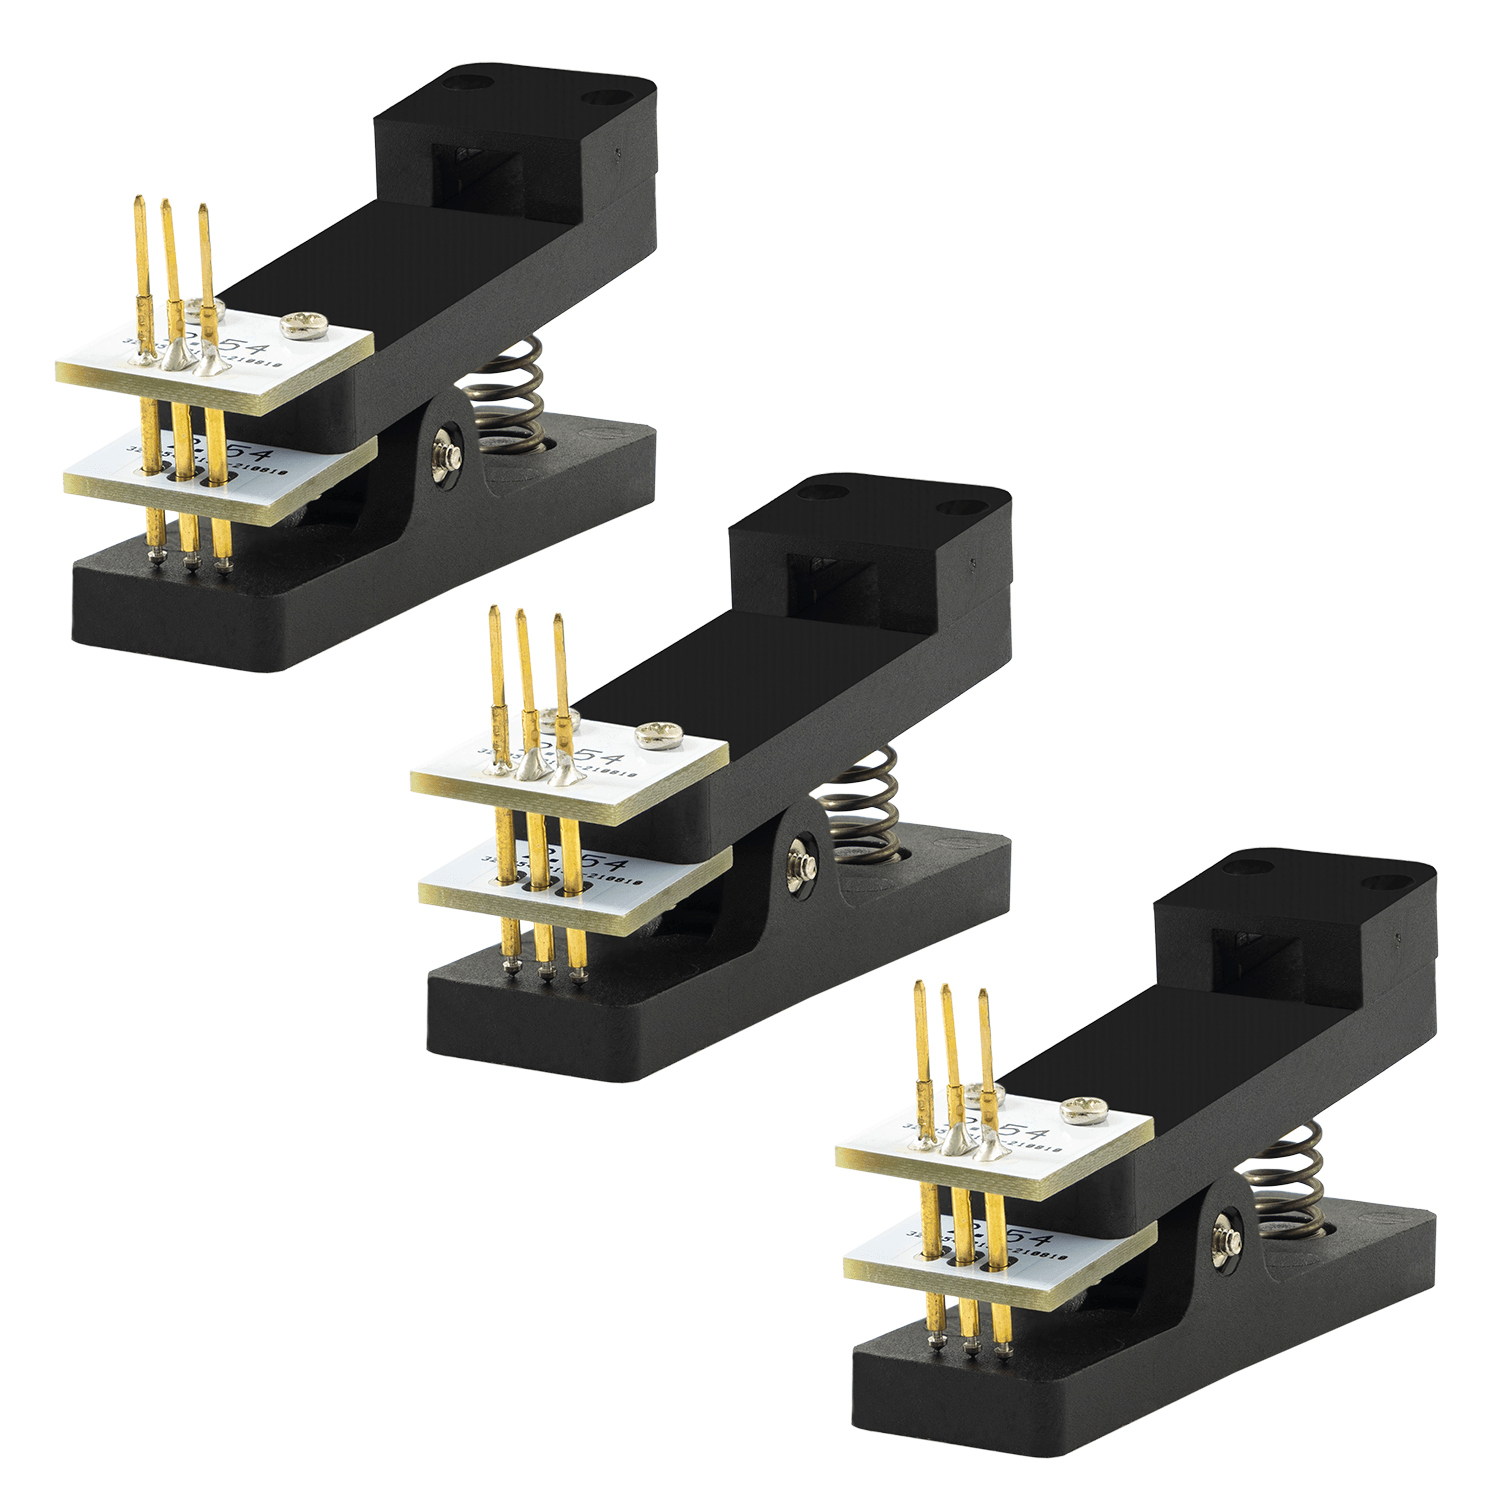 3 Pin Module Test Tool Prototyping Clamps 1x3 P 2.54MM Pitch Tester Module